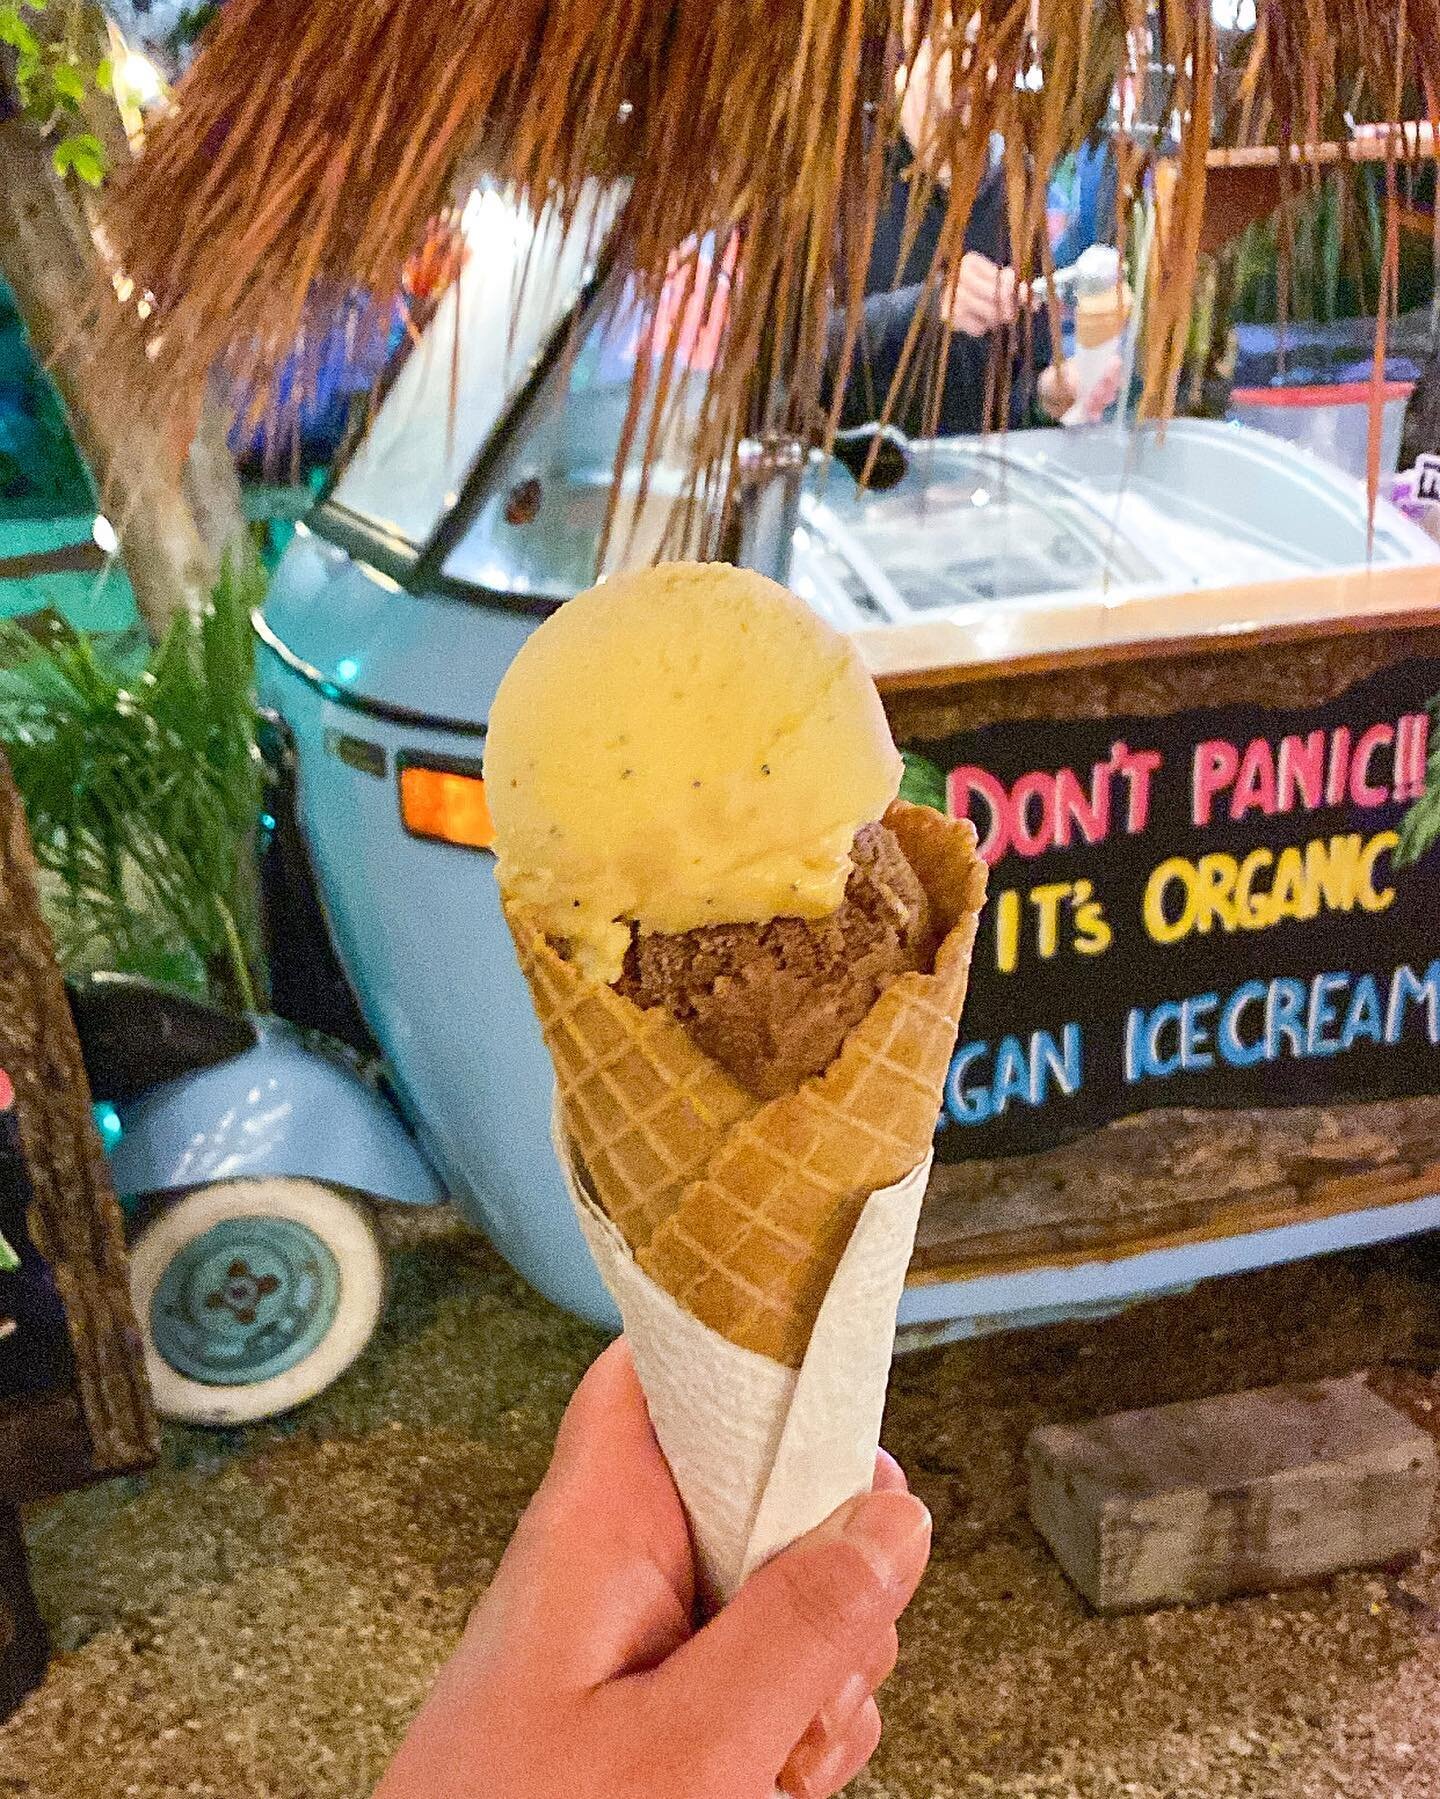 Still dreaming about these scoops🍦Passion Fruit &amp; Cacao ice cream in a waffle cone! 😍

👈 Swipe to see all of the delicious flavour options!

We visited @thetuktukmx at @palmacentraltulum last night and it was such a treat! This coconut-based v